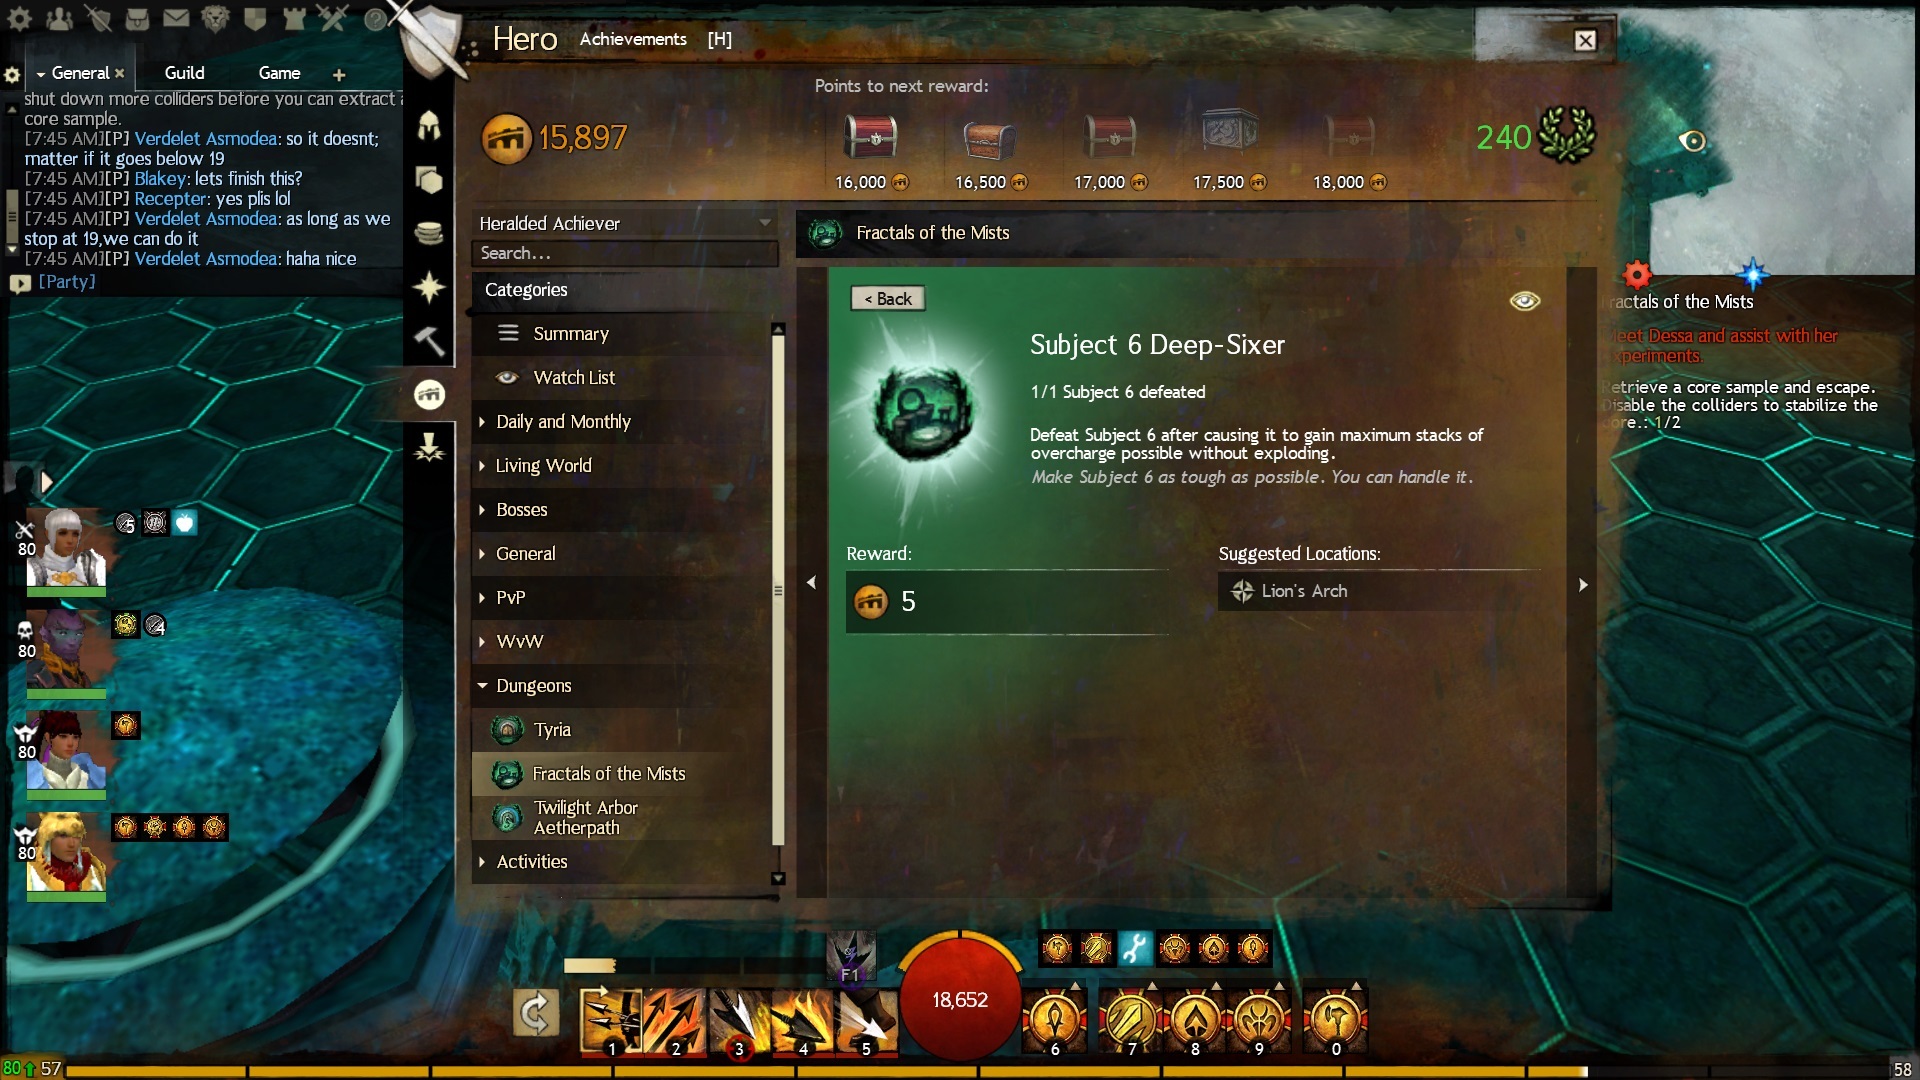 Next reward. Fractals of the Mists.. Guild Wars 2 there was an Unspecified Error. Please try again..